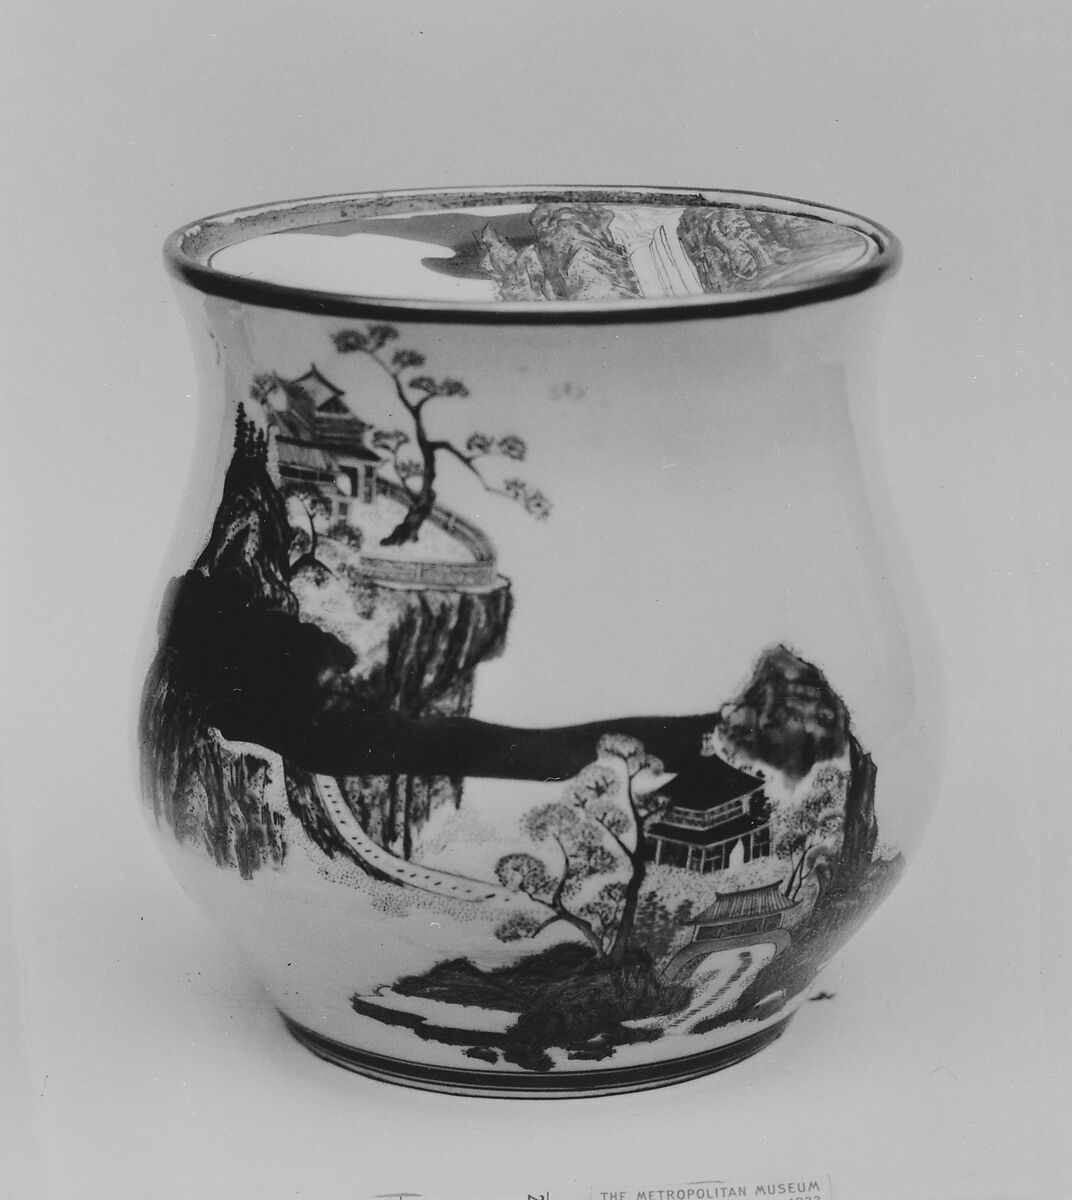 Water pot and cover, White porcelain decorated in colored enamels, Japan 